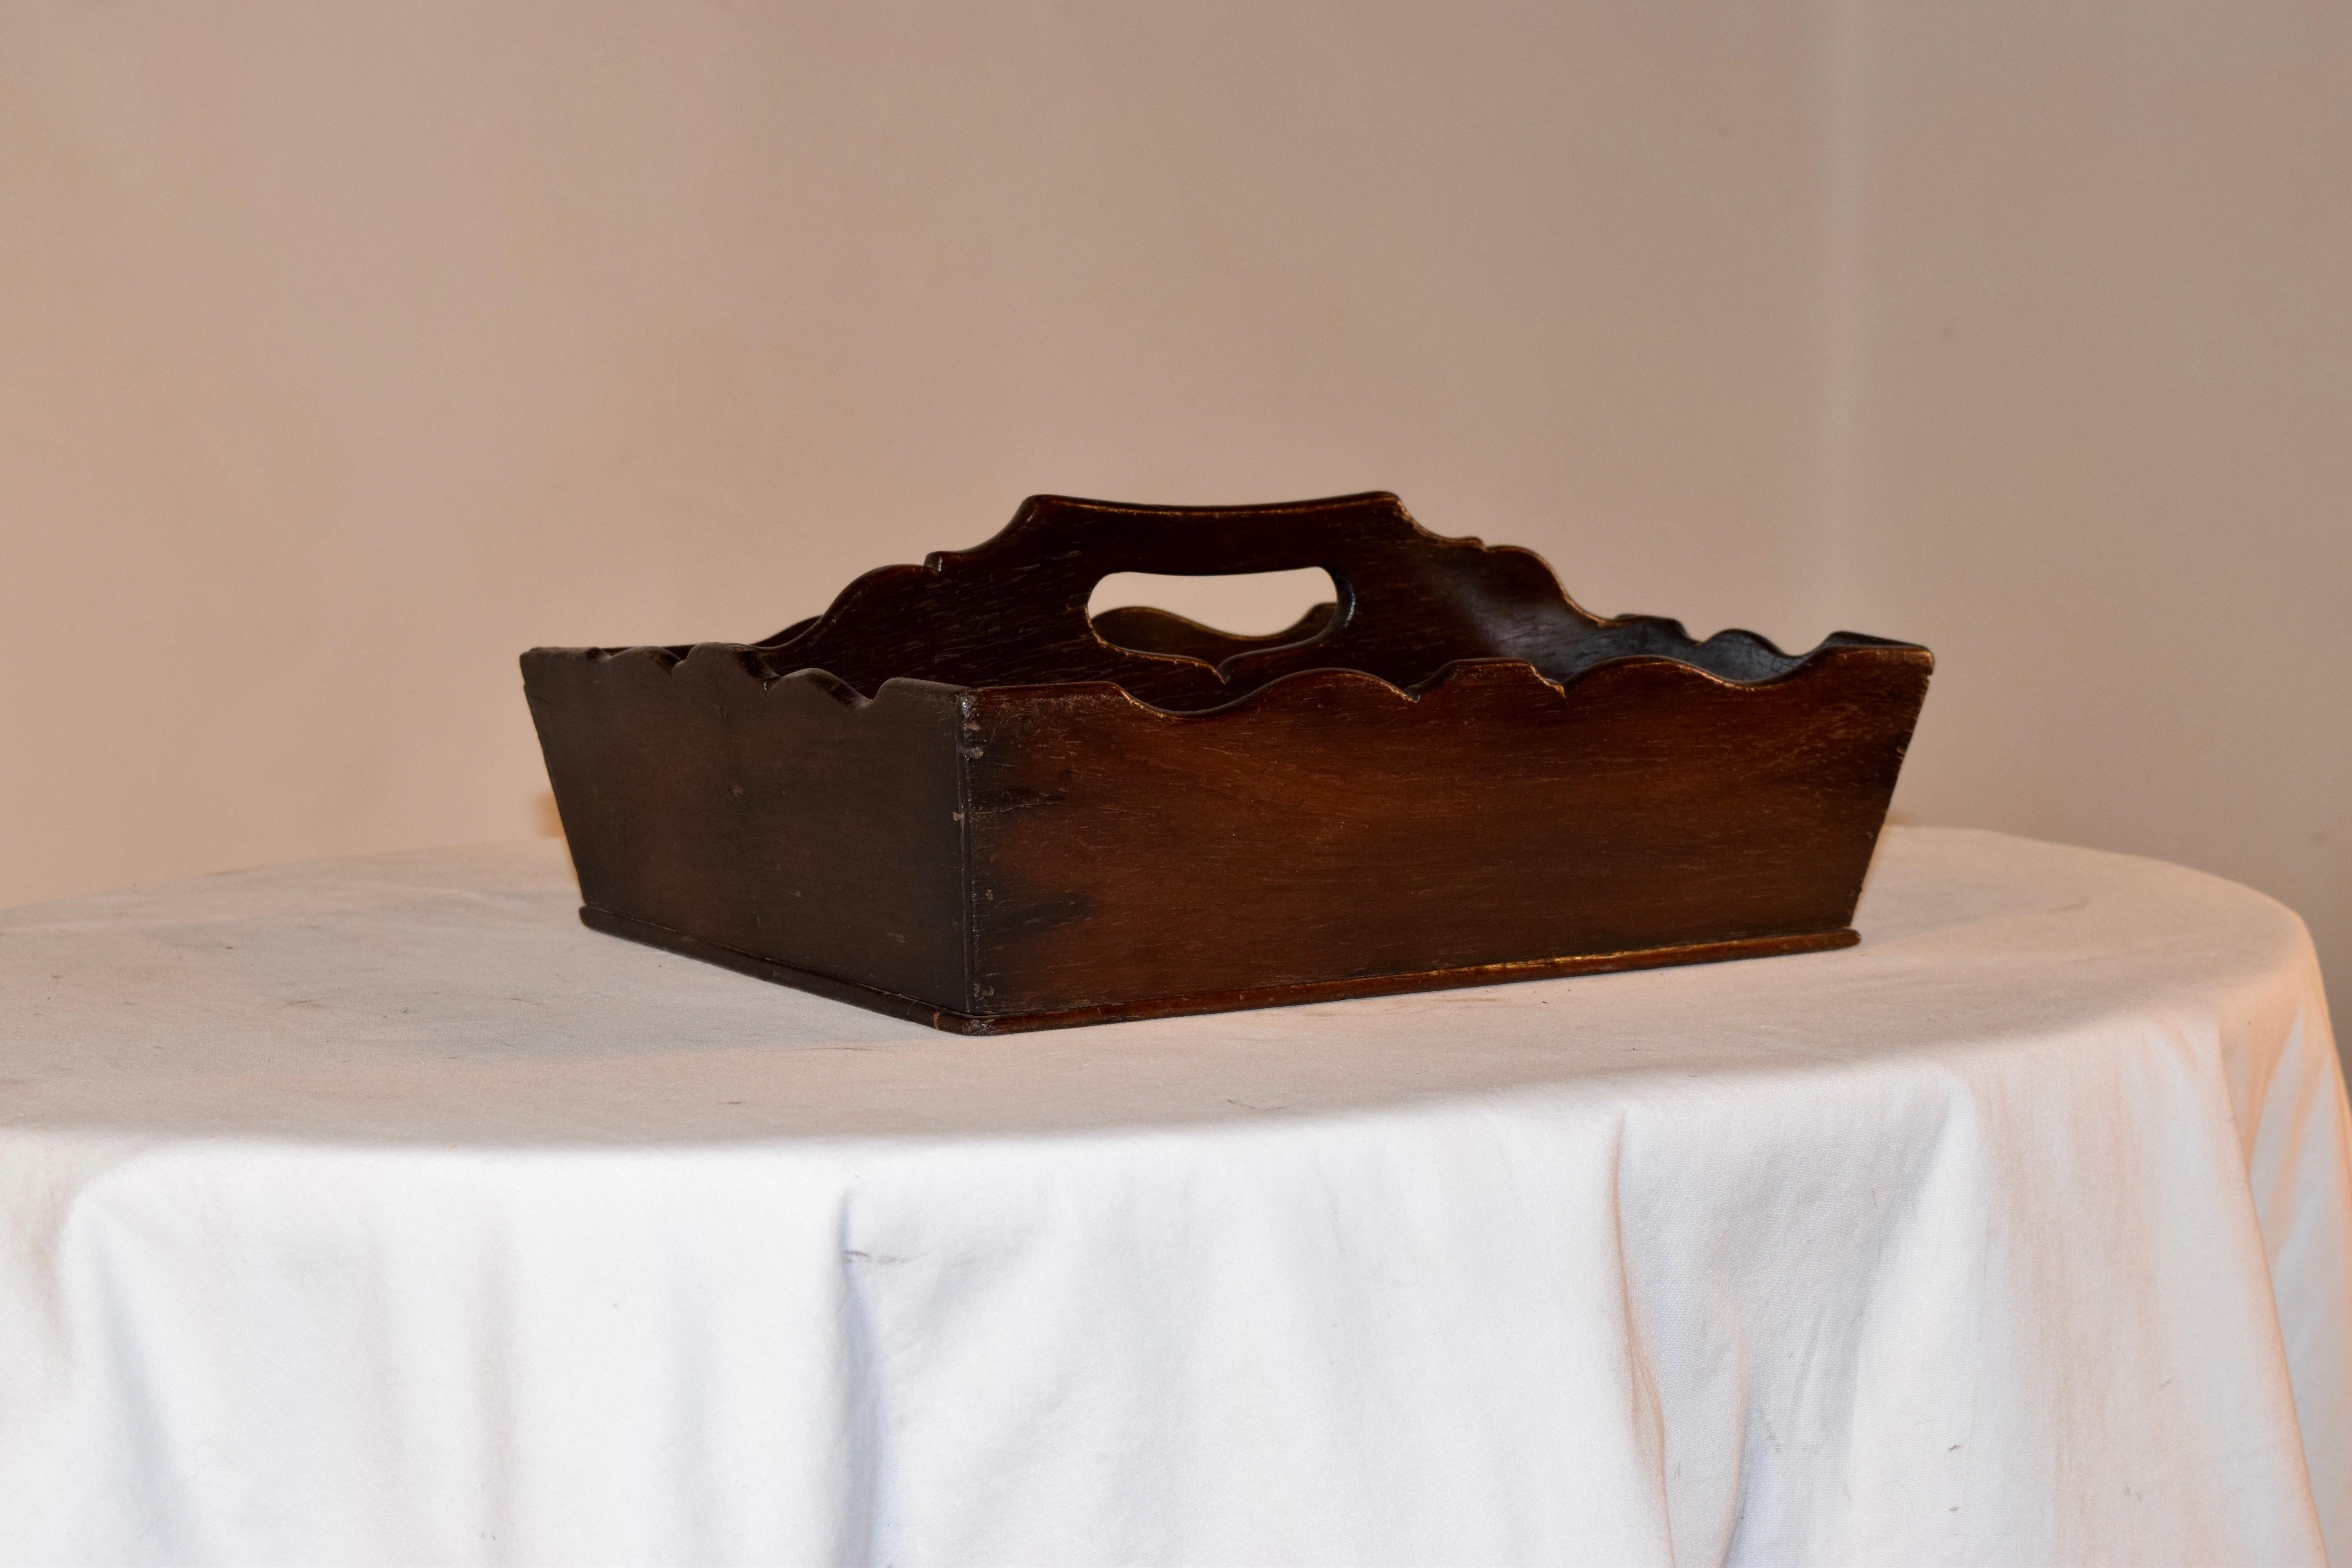 Early 19th century cutlery tray from England made from oak with hand scalloped edges around the top and a shaped handle.